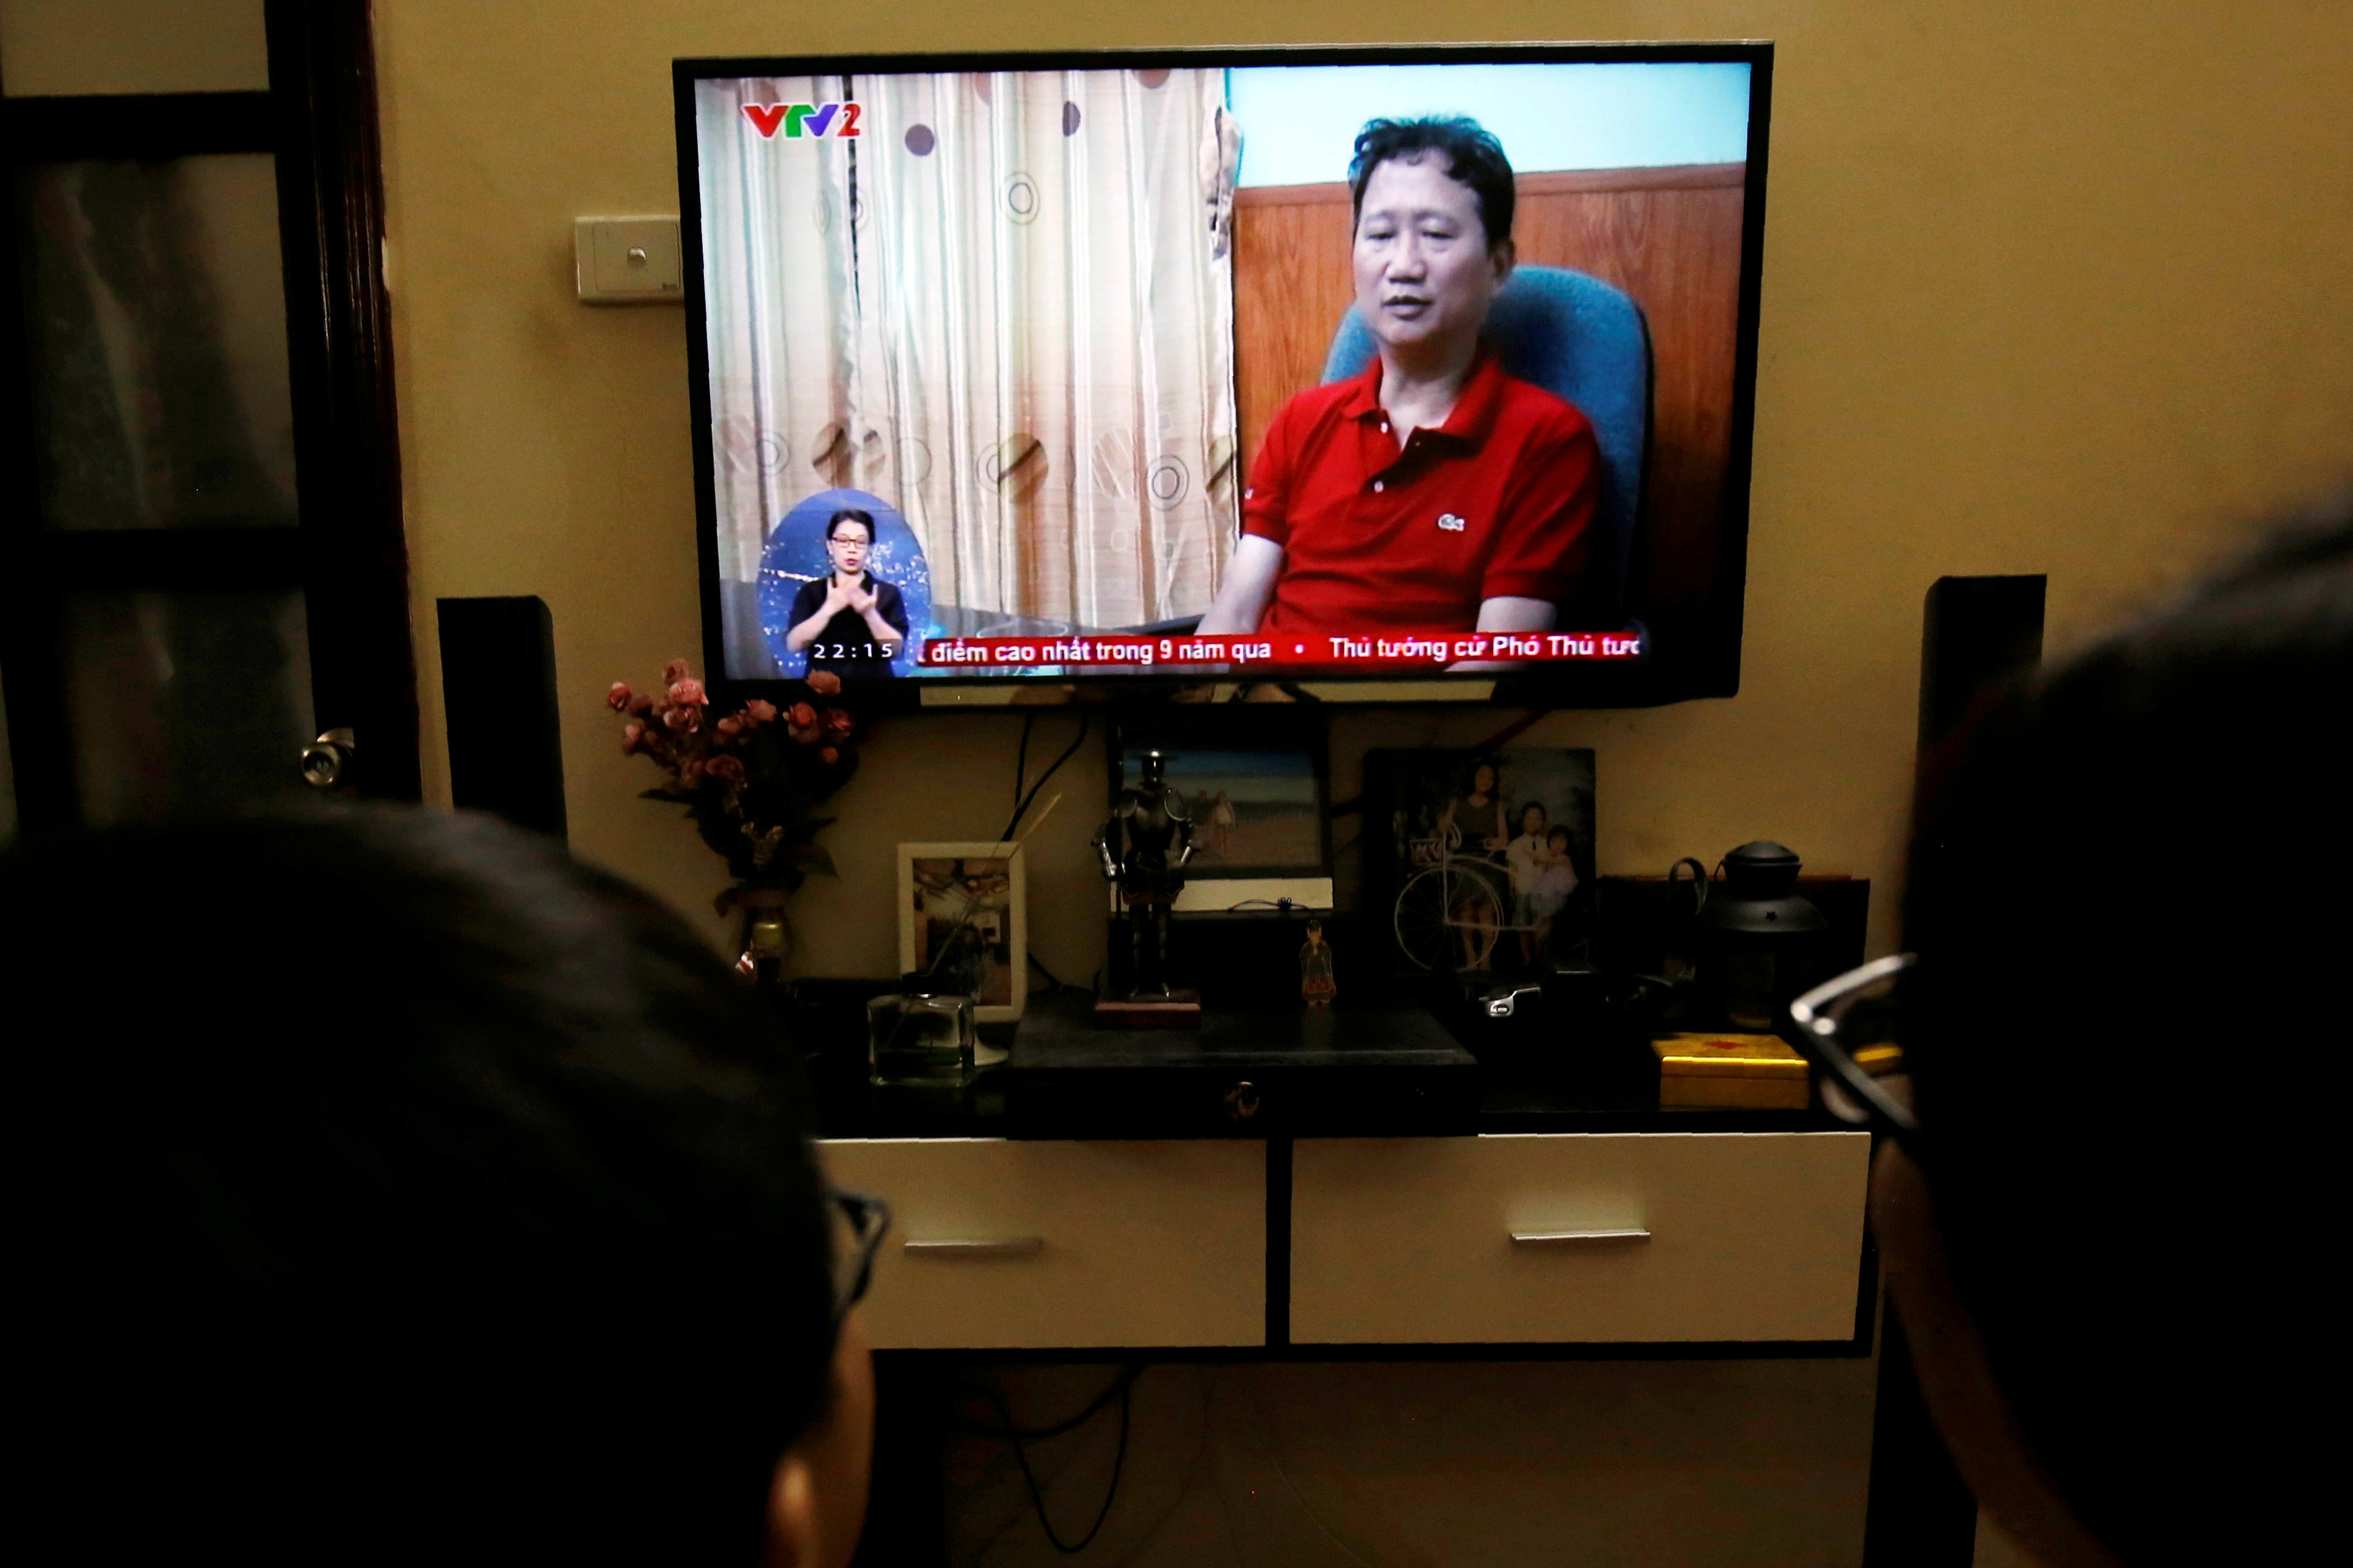 Scandal-hit Vietnam official had been cleared cleared of wrongdoing by previous government